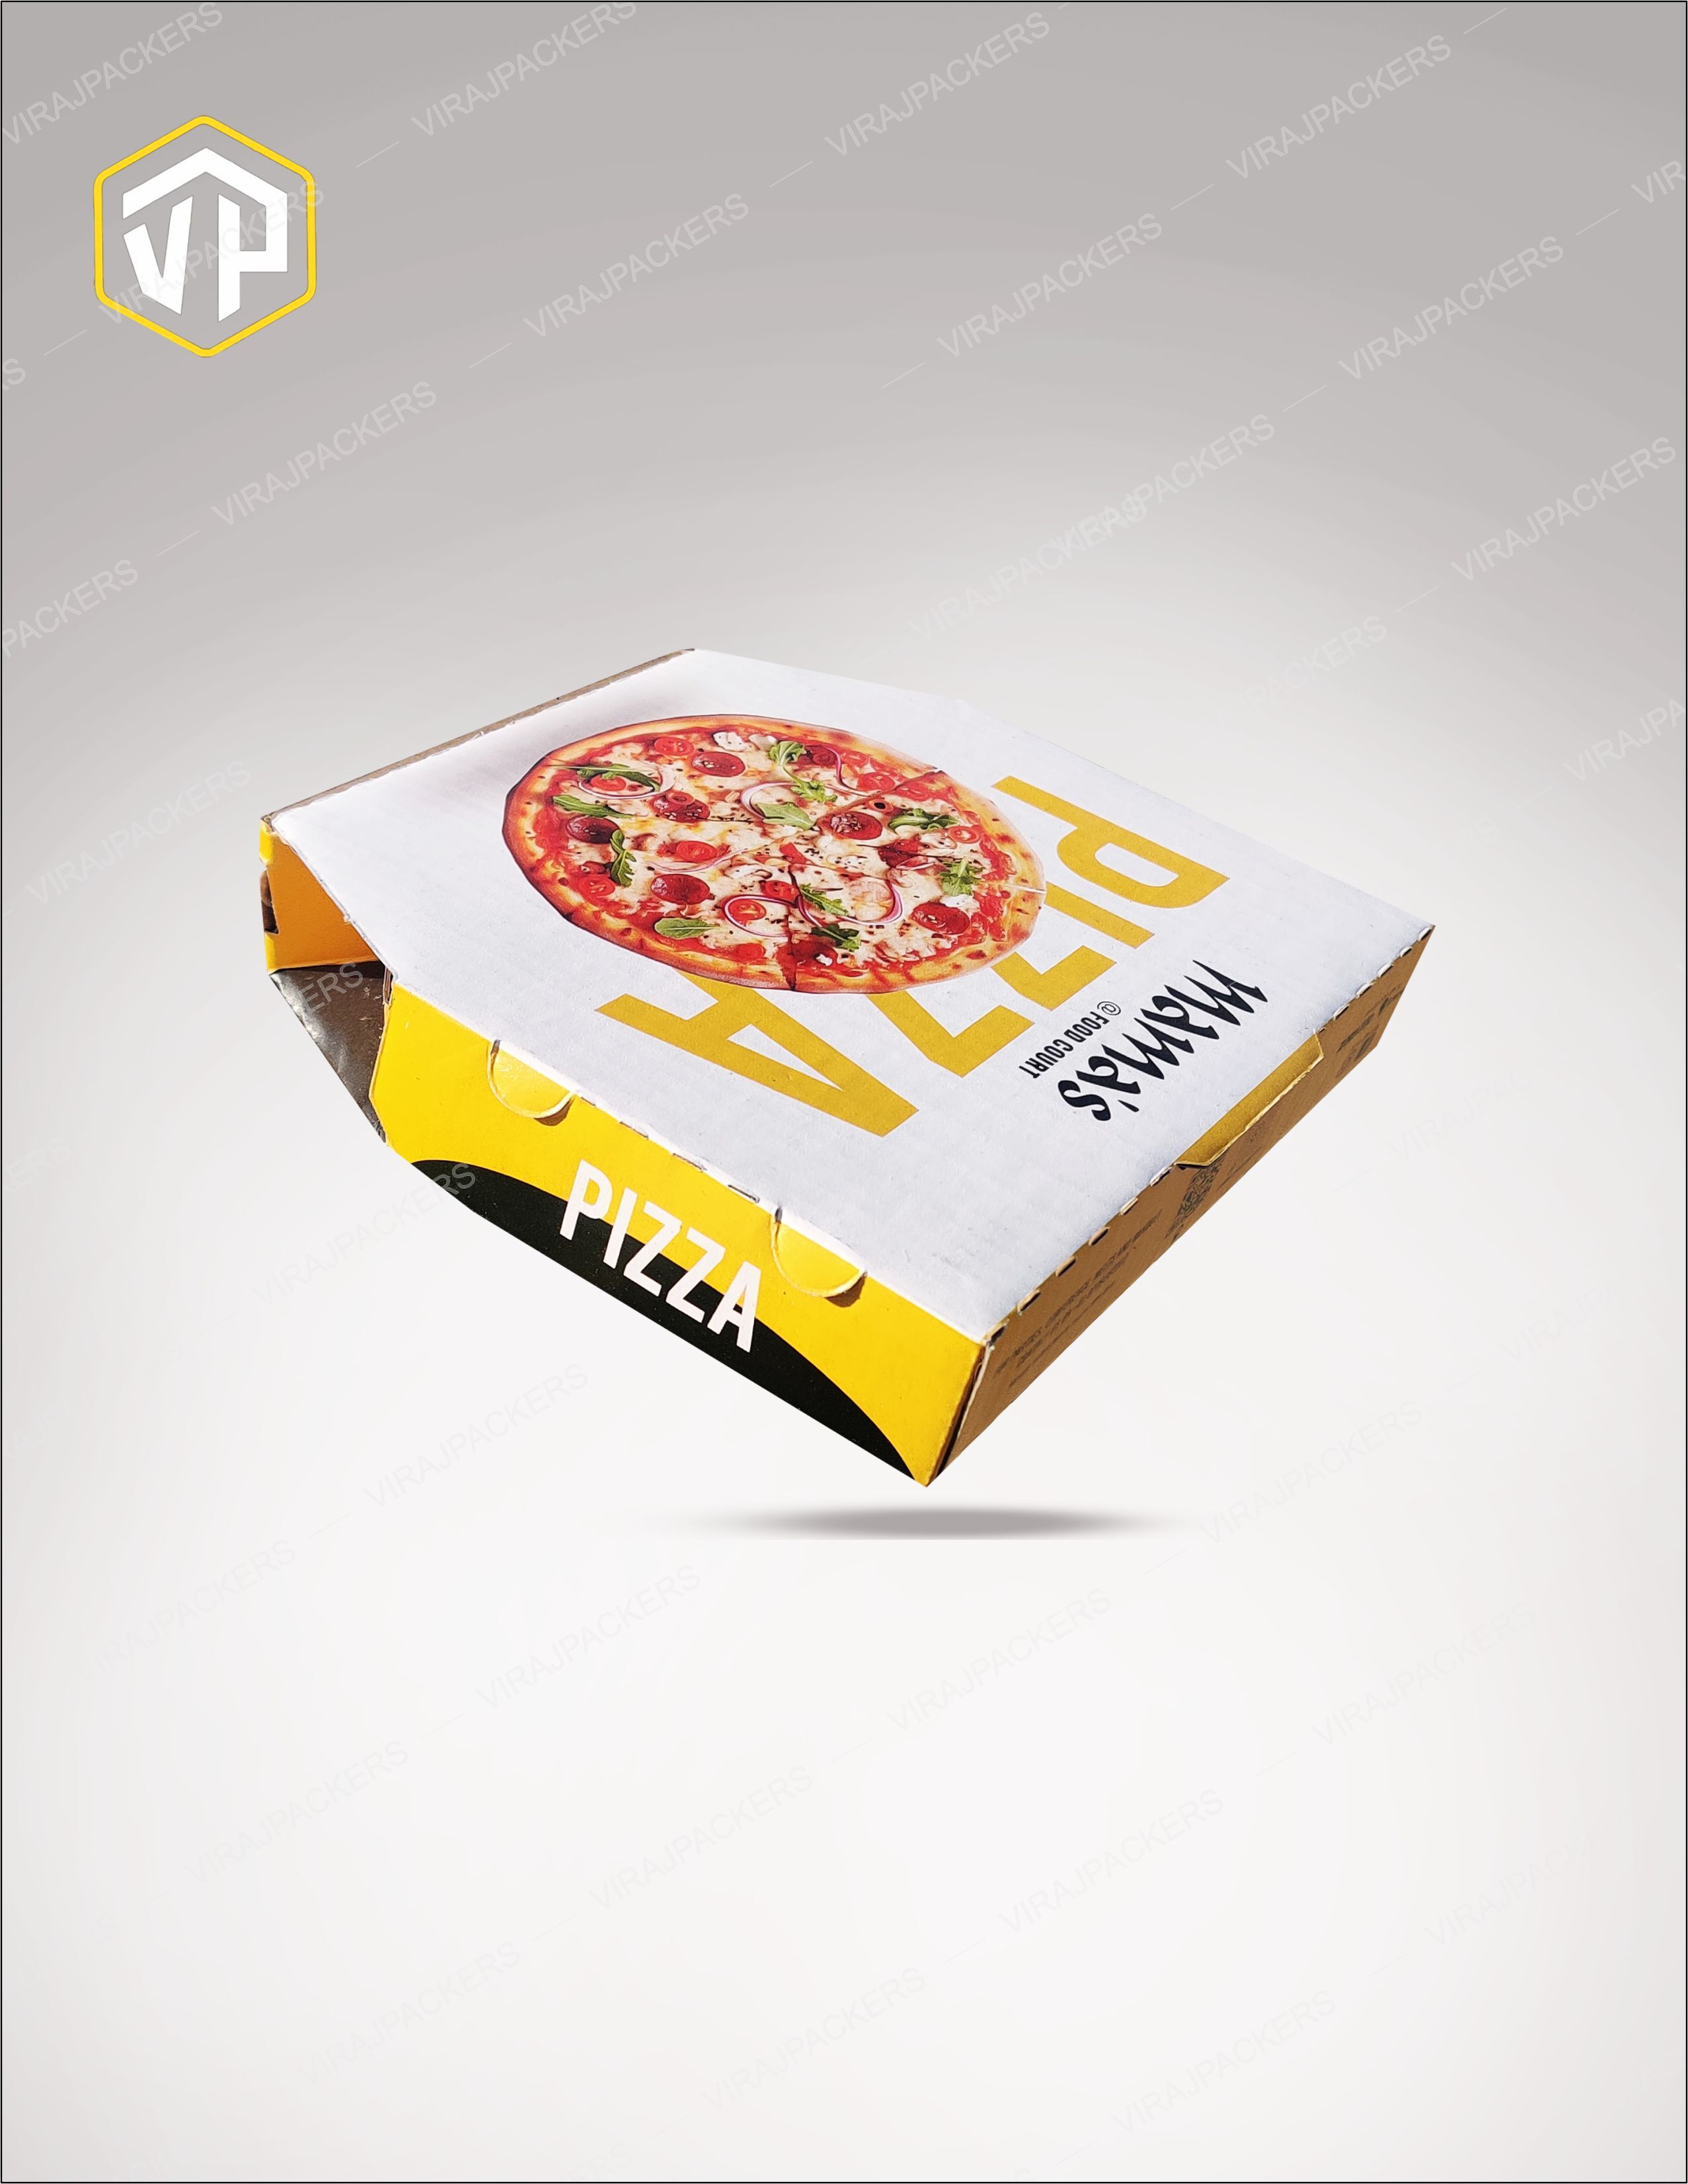 8 Inch Customized Pizza Packaging box / 3 ply Pizza Packaging box / Domino Pizza Box